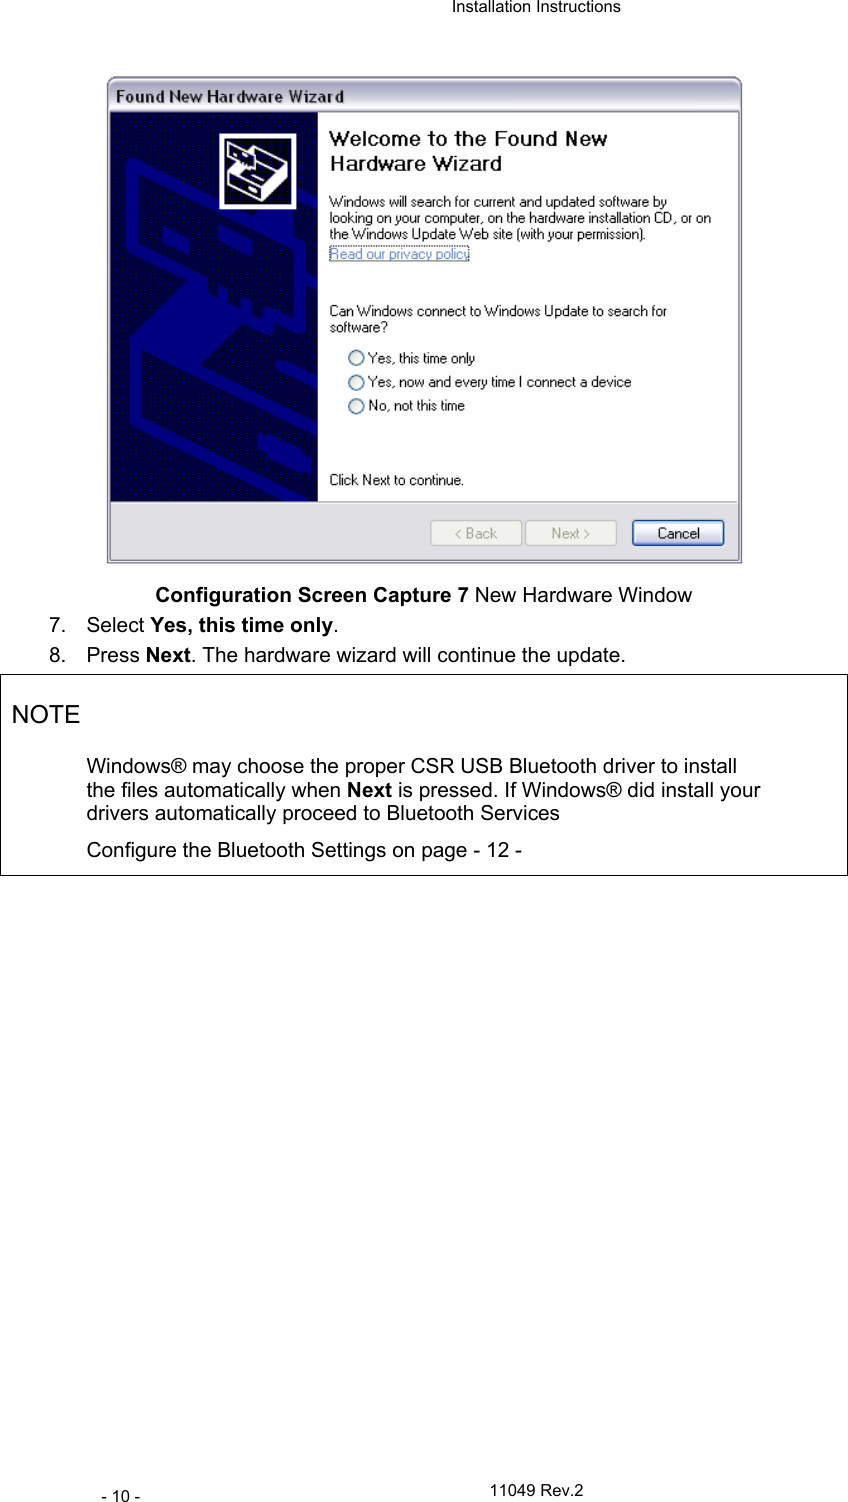  Installation Instructions   11049 Rev.2 - 10 -  Configuration Screen Capture 7 New Hardware Window 7. Select Yes, this time only. 8. Press Next. The hardware wizard will continue the update. NOTE Windows® may choose the proper CSR USB Bluetooth driver to install the files automatically when Next is pressed. If Windows® did install your drivers automatically proceed to Bluetooth Services Configure the Bluetooth Settings on page - 12 -  